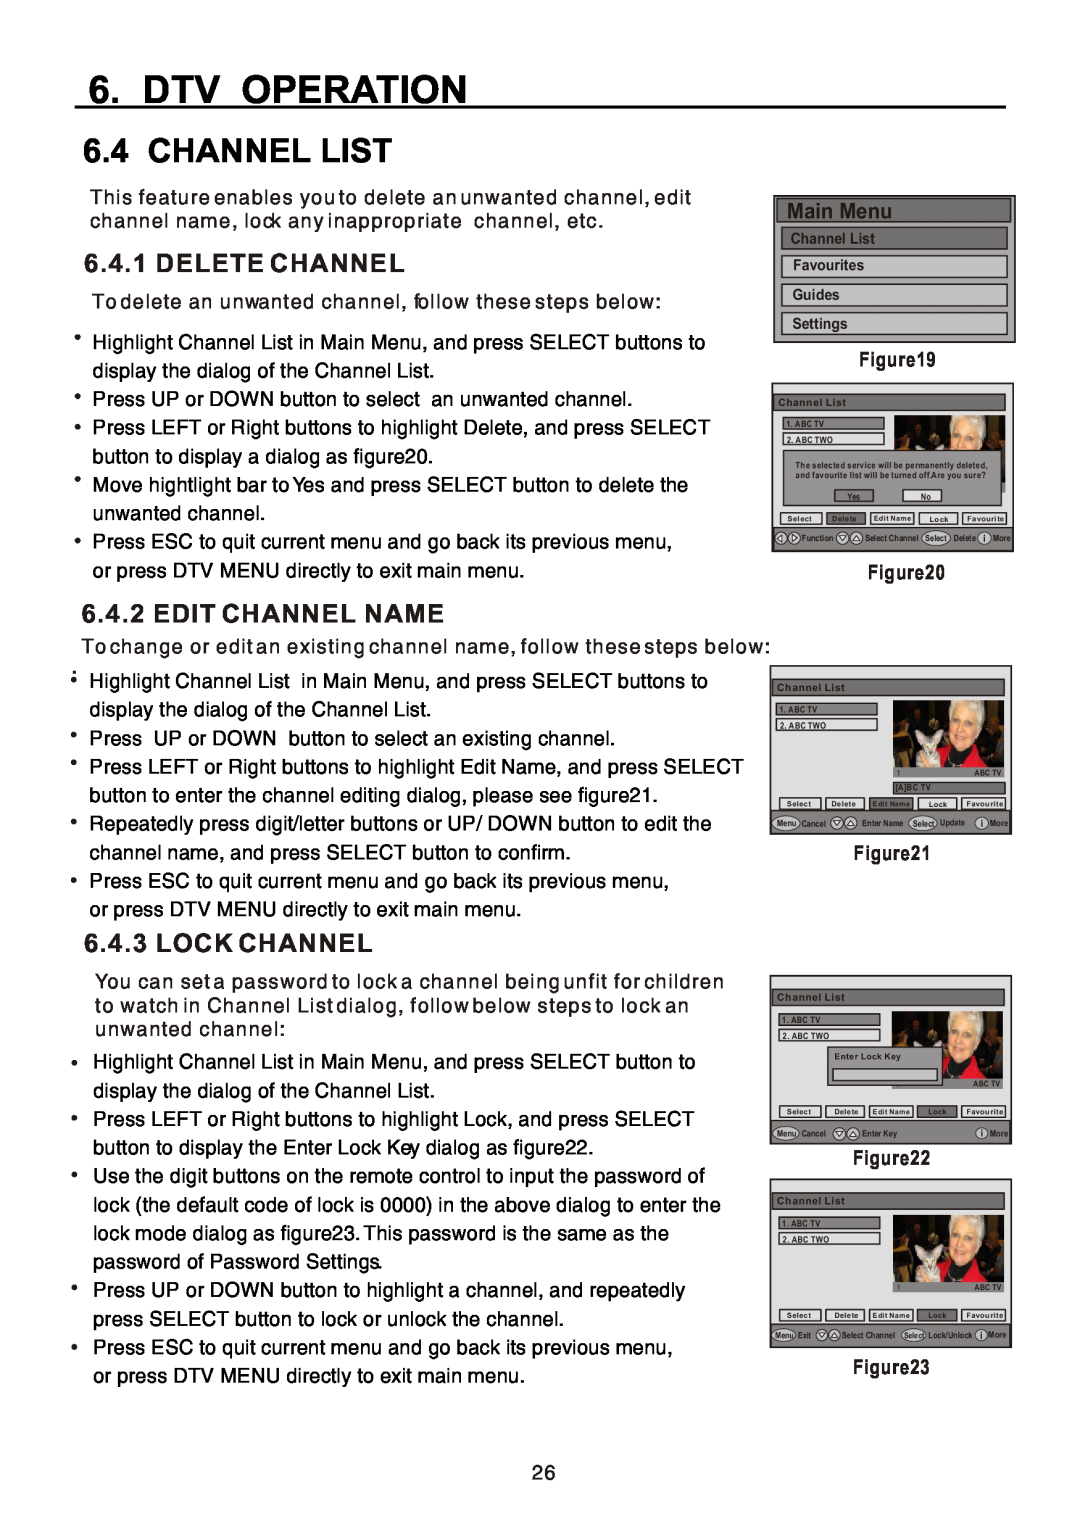 Teac CT-W32ID owner manual Channel List, Delete Channel, Edit Channel Name, Lock Channel, Dtv Operation, Main Menu 